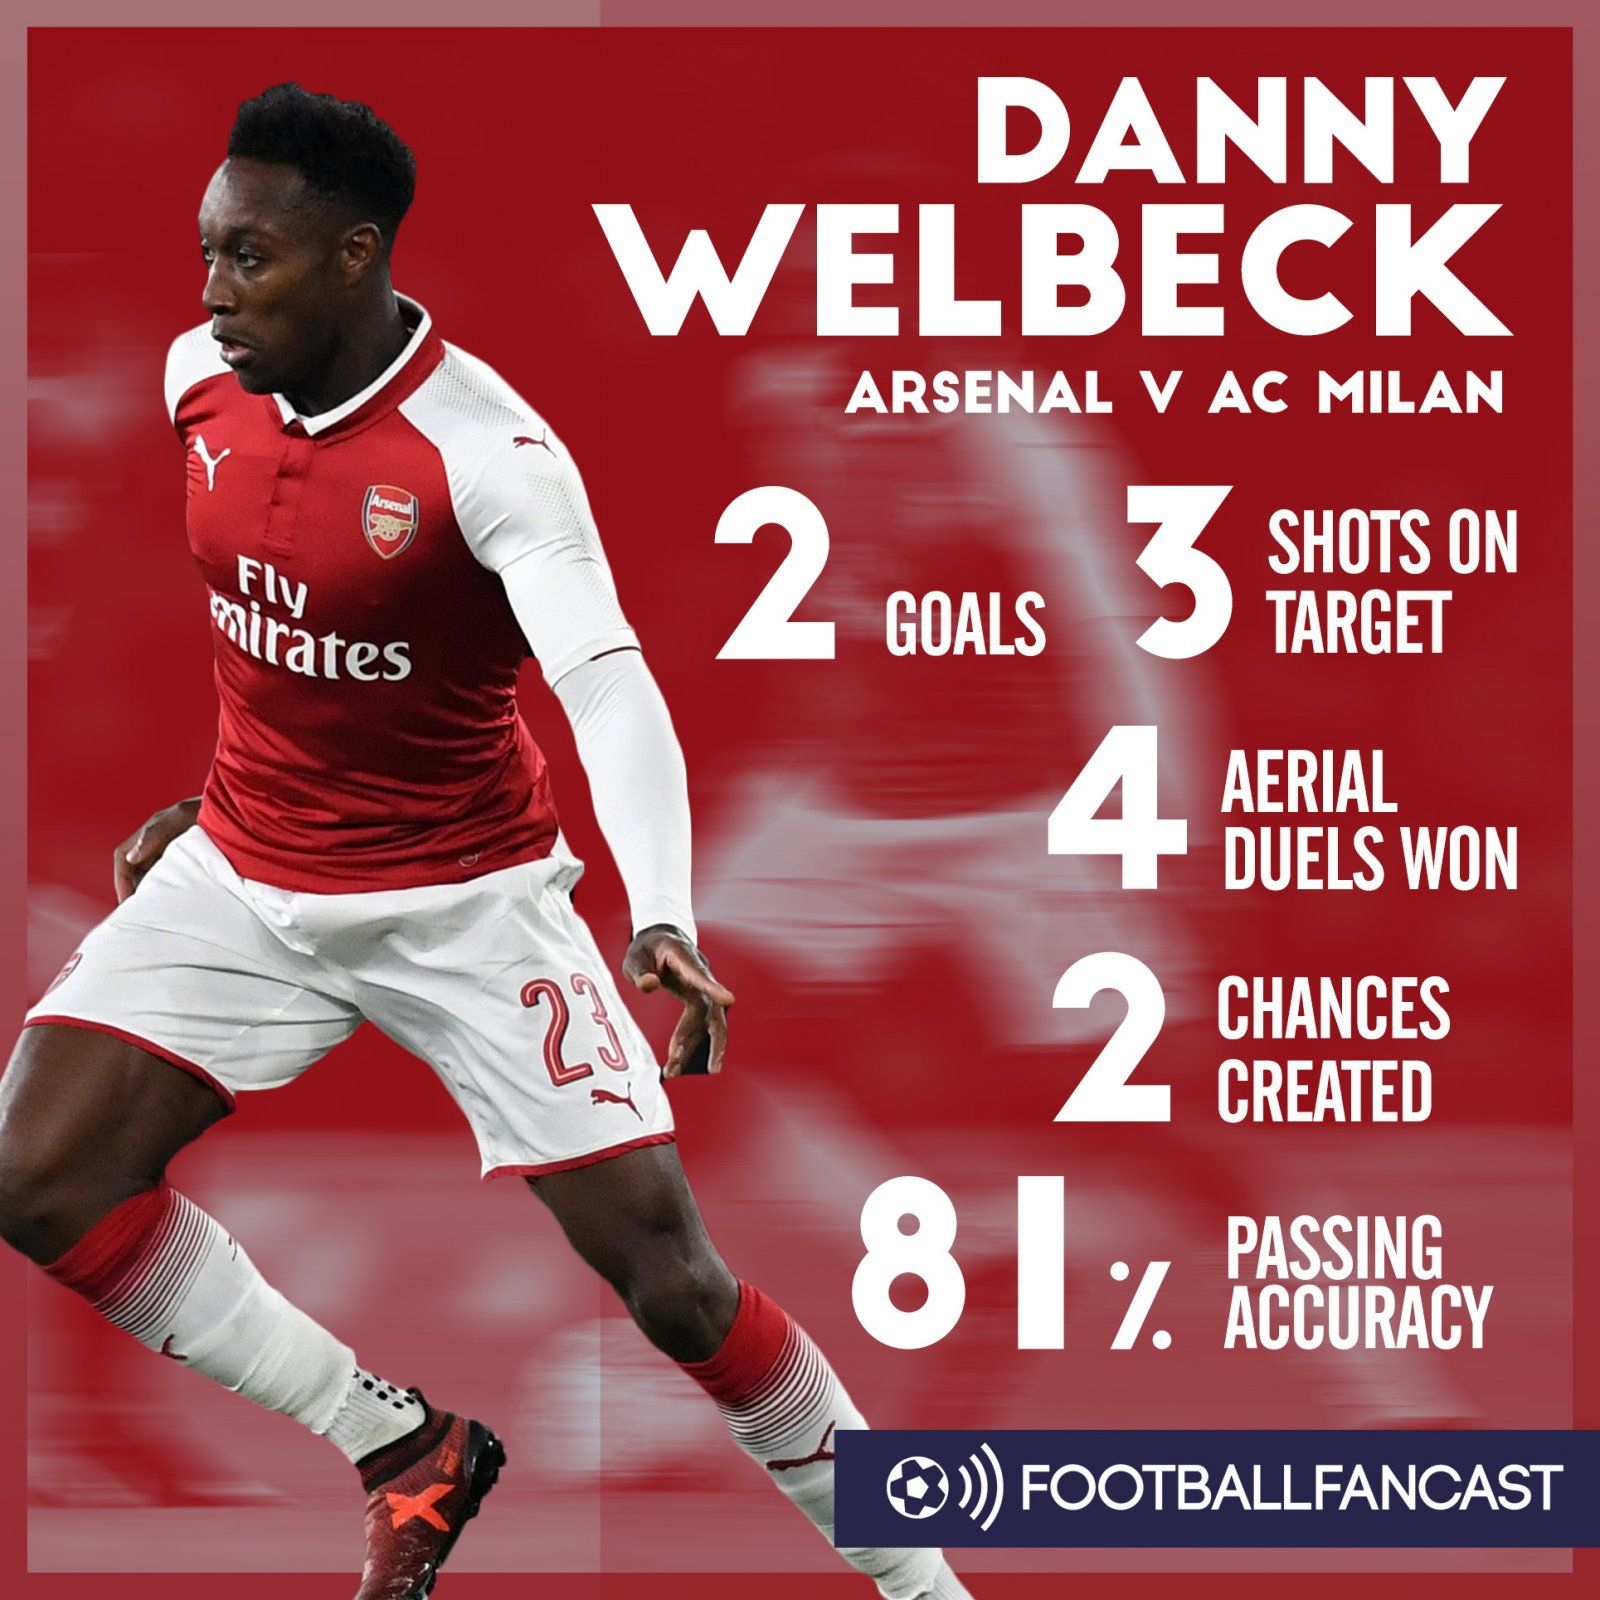 Danny Welbeck's stats from Arsenal's 3-1 win over AC Milan